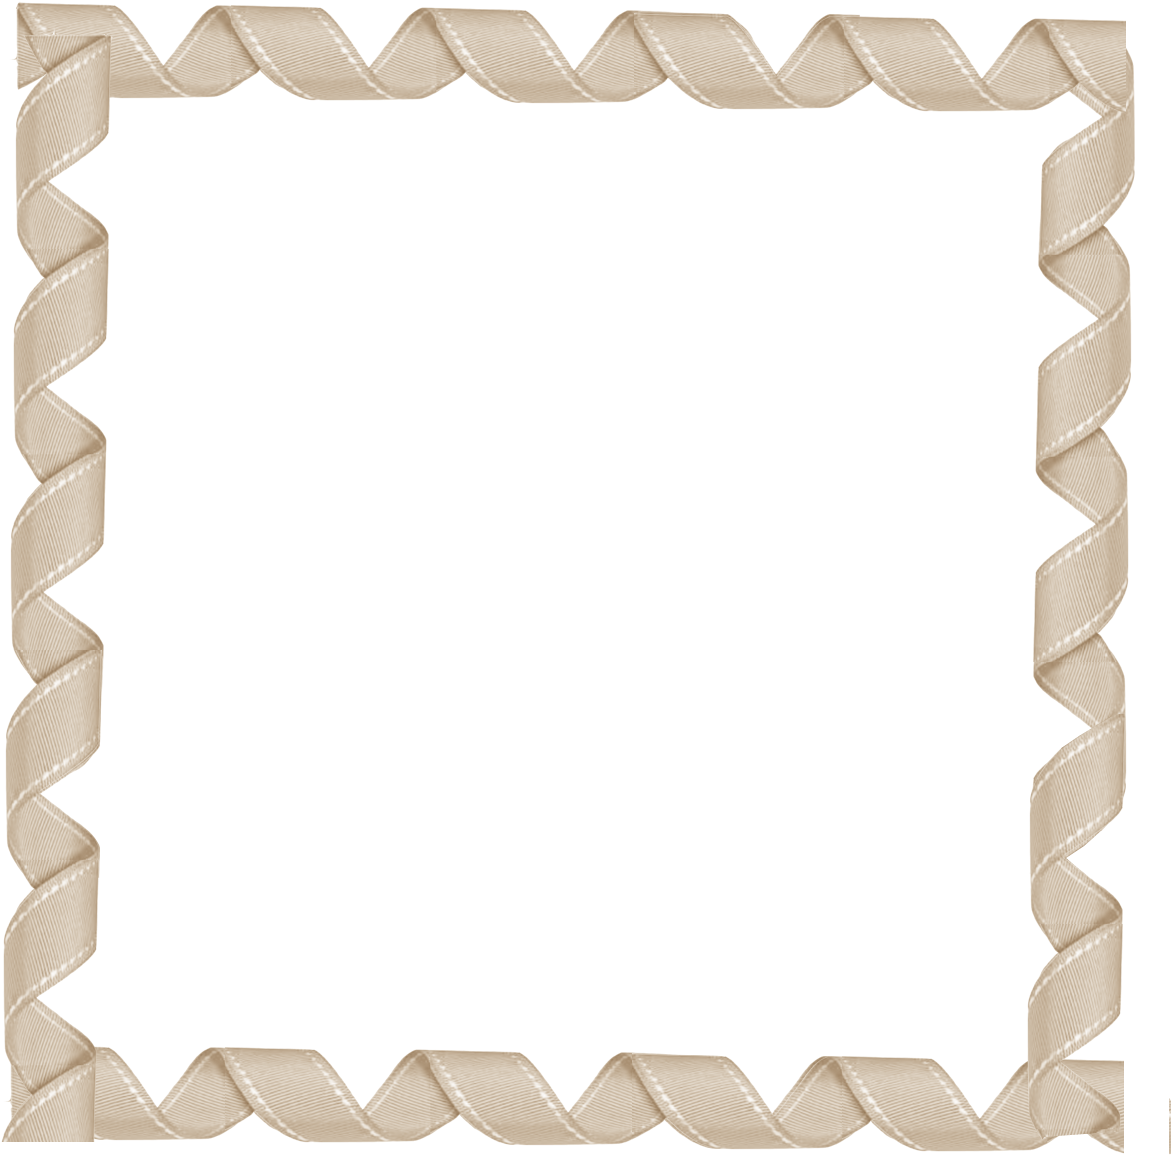 Free Printable Frames, Borders And Labels - Free Printable Frames, Borders And Labels (1200x1200)